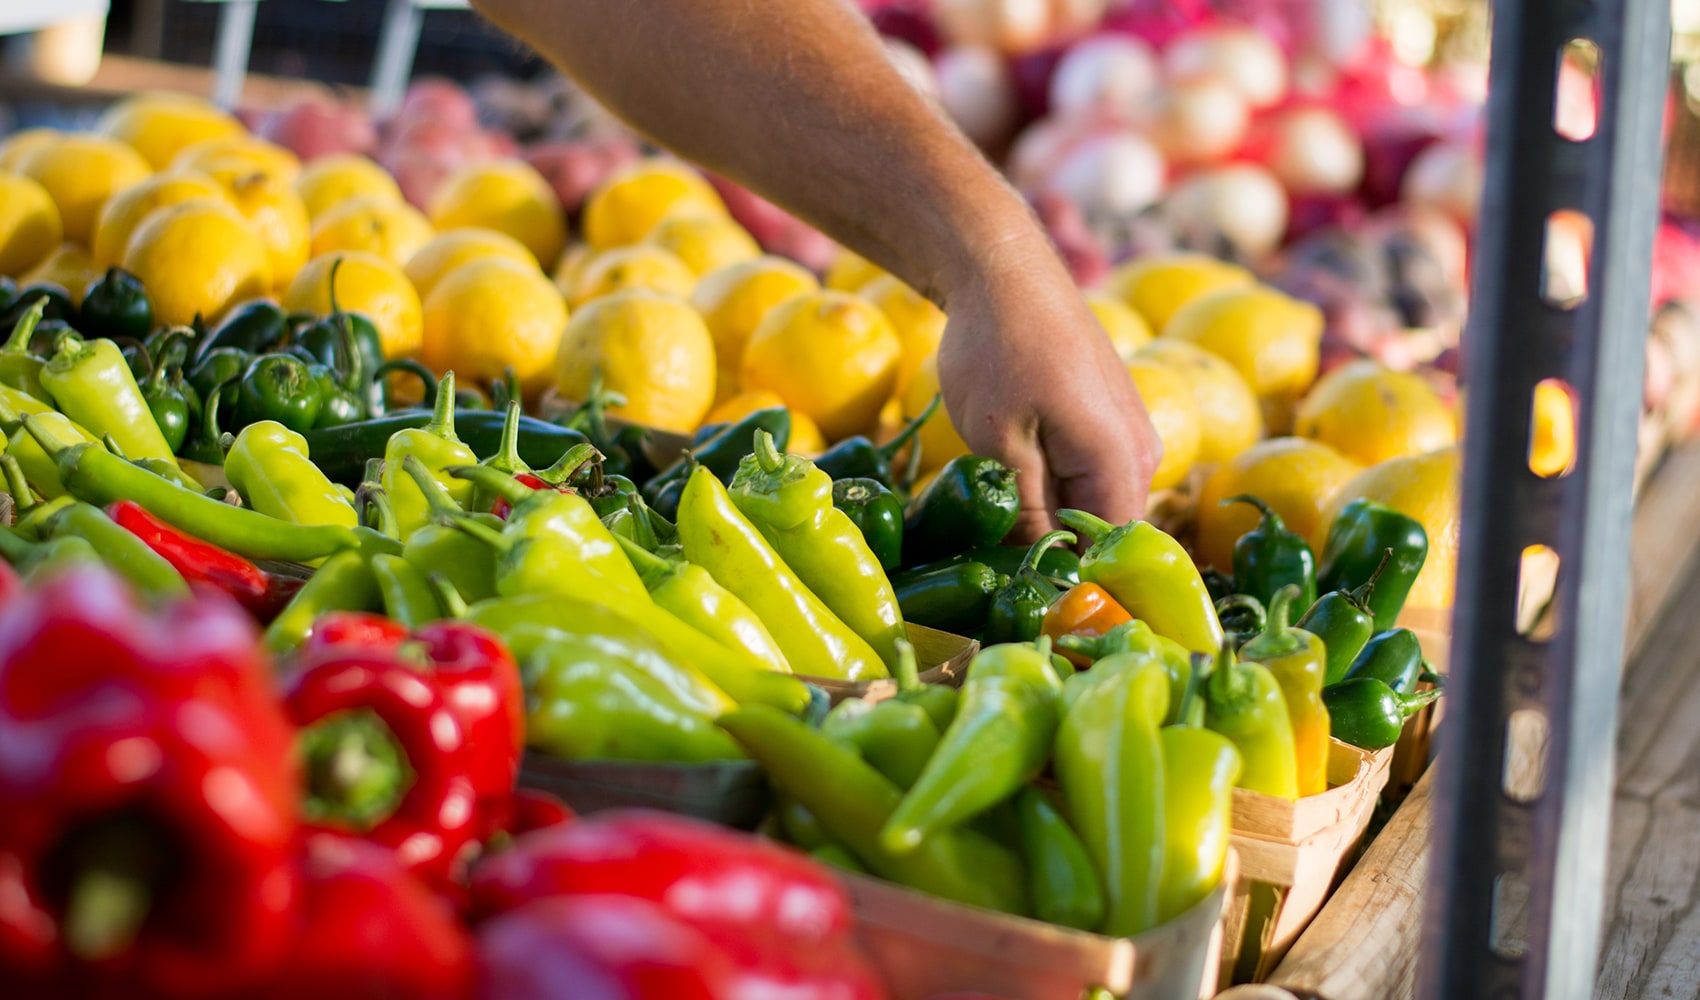 A hand reaching for a basket of red, green and yellow peppers at a farmers market table